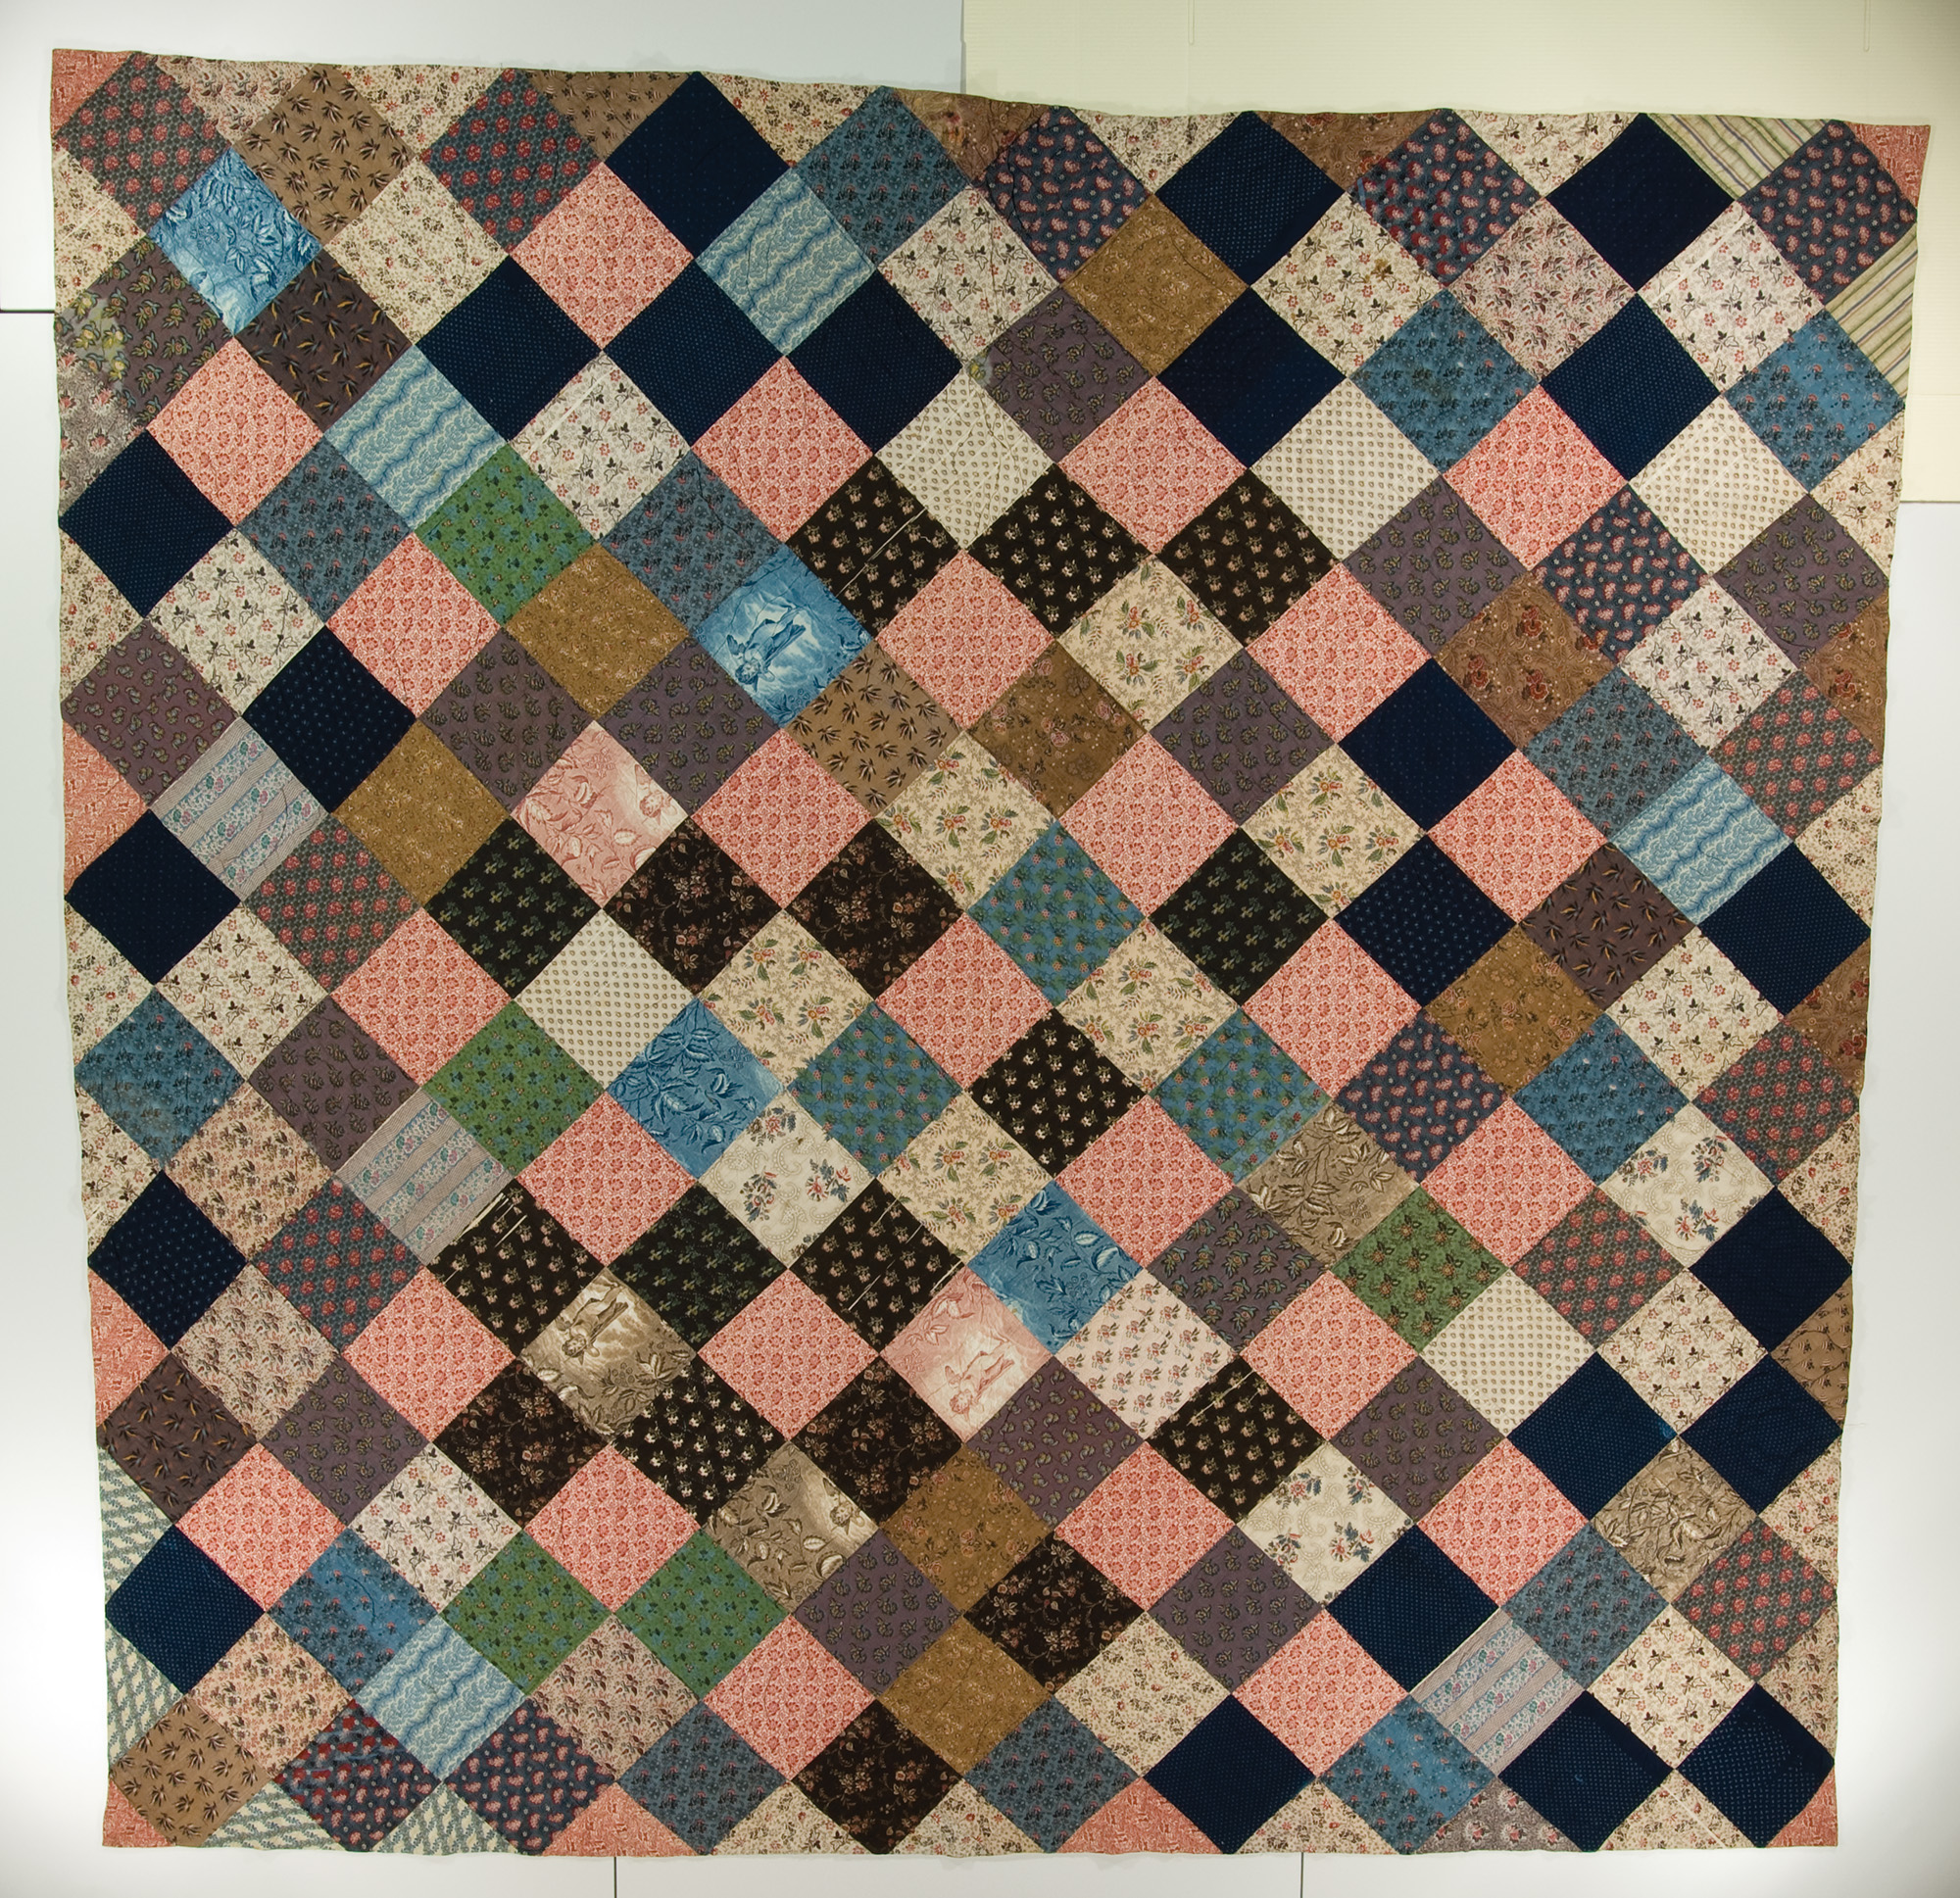 Favorites from the Dillow Collection | International Quilt Museum ...